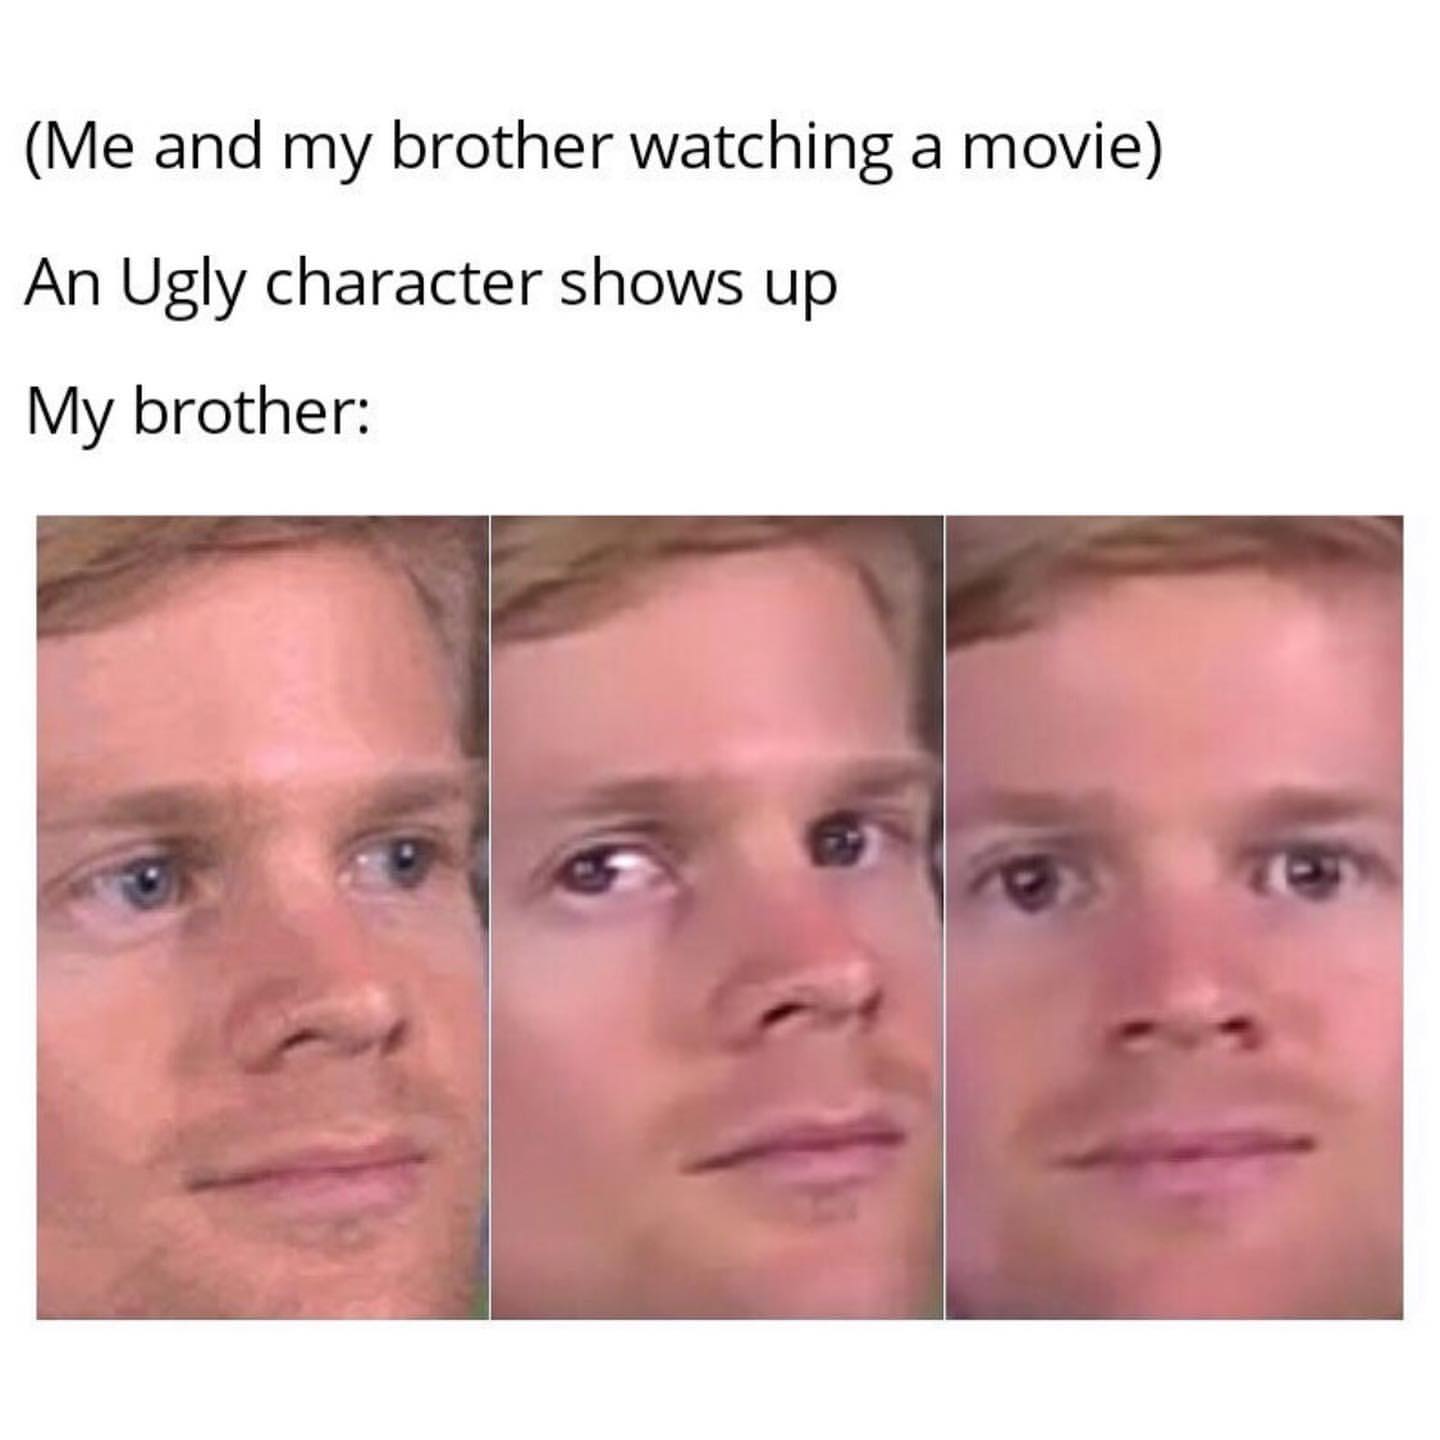 (Me and my brother watching a movie) An ugly character shows up. My brother: